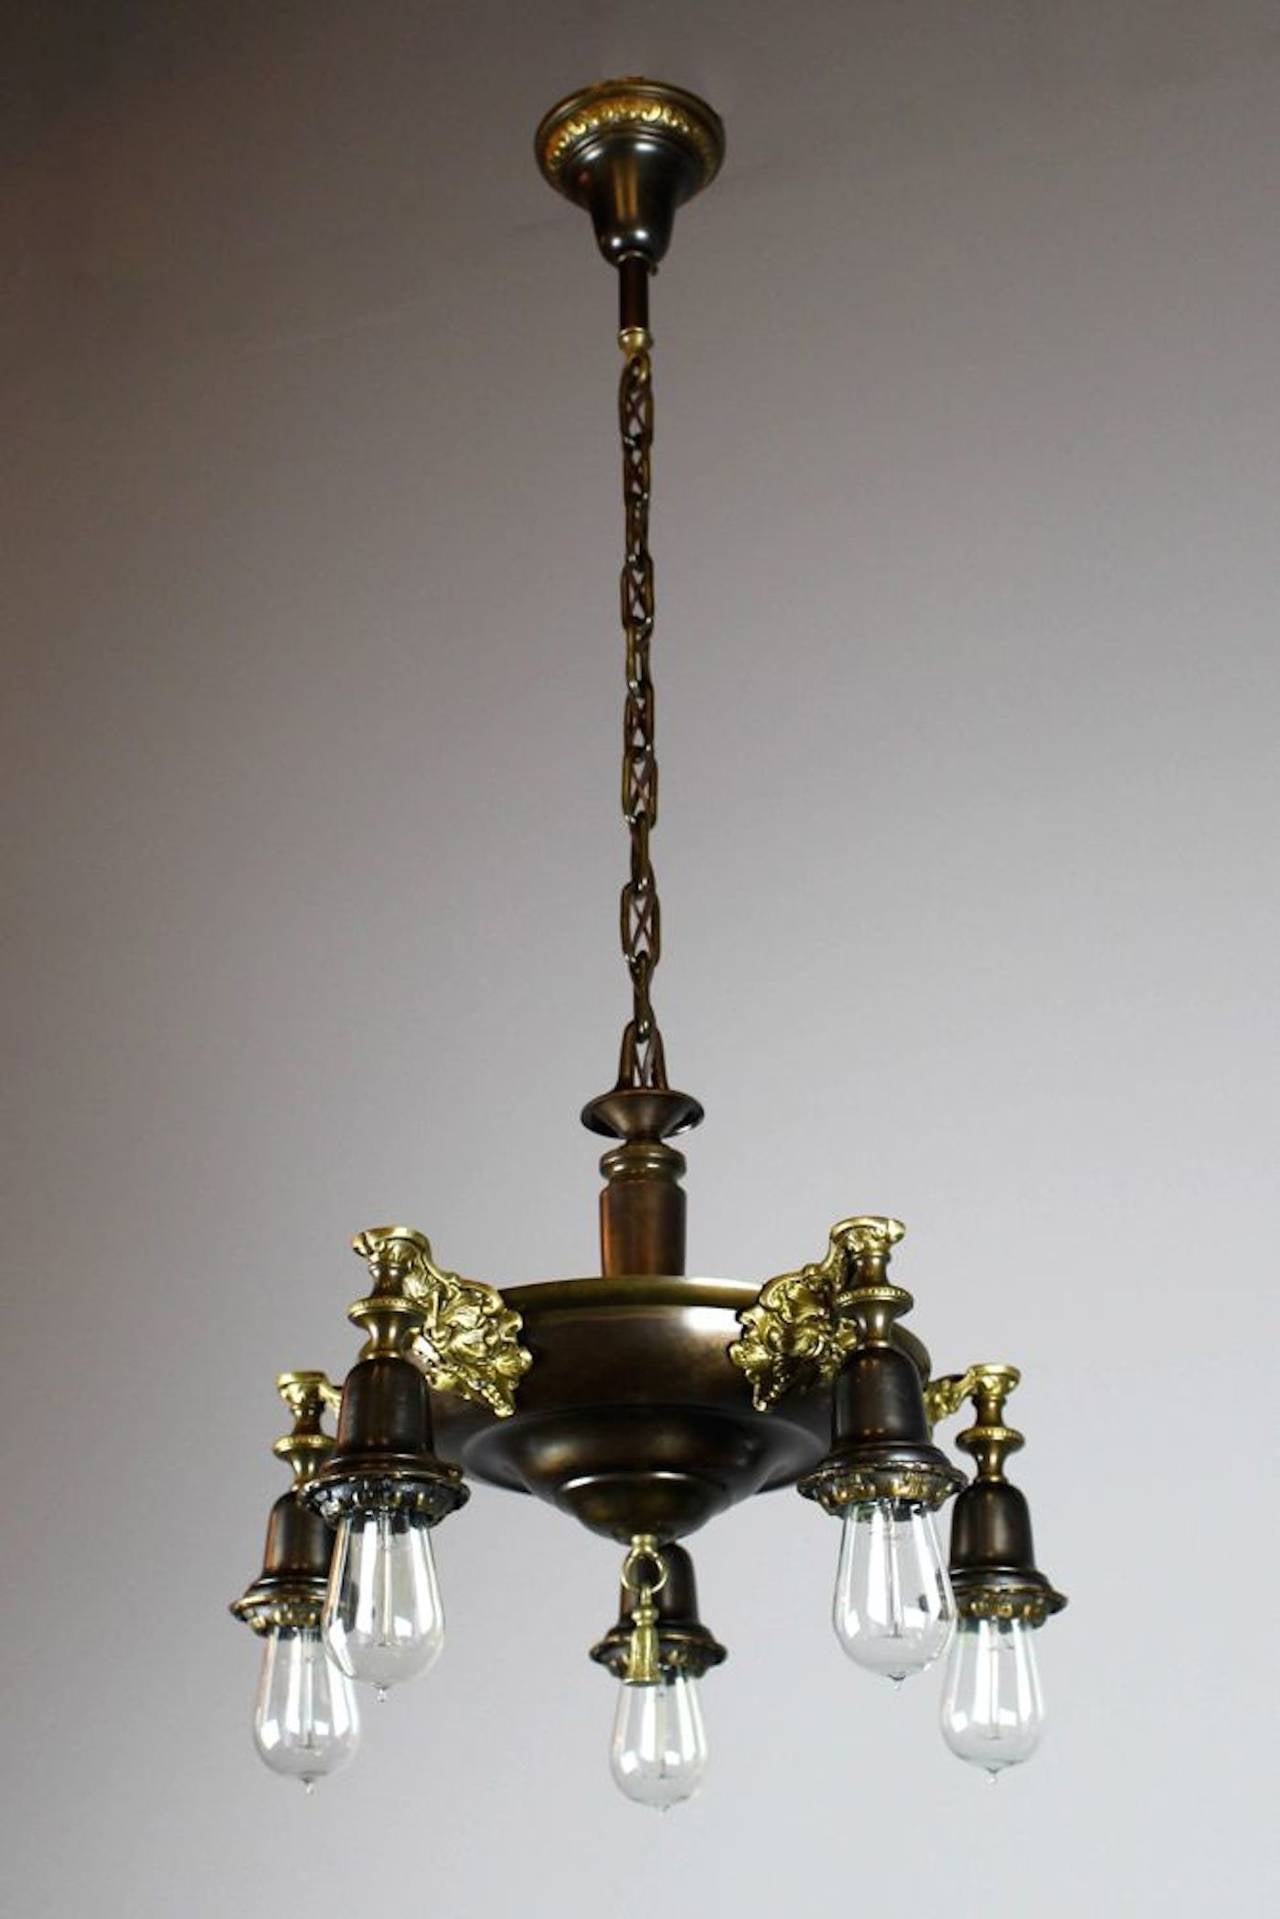 North American Two-Tone Edwardian Five-Light Pan Fixture with Bare Bulbs